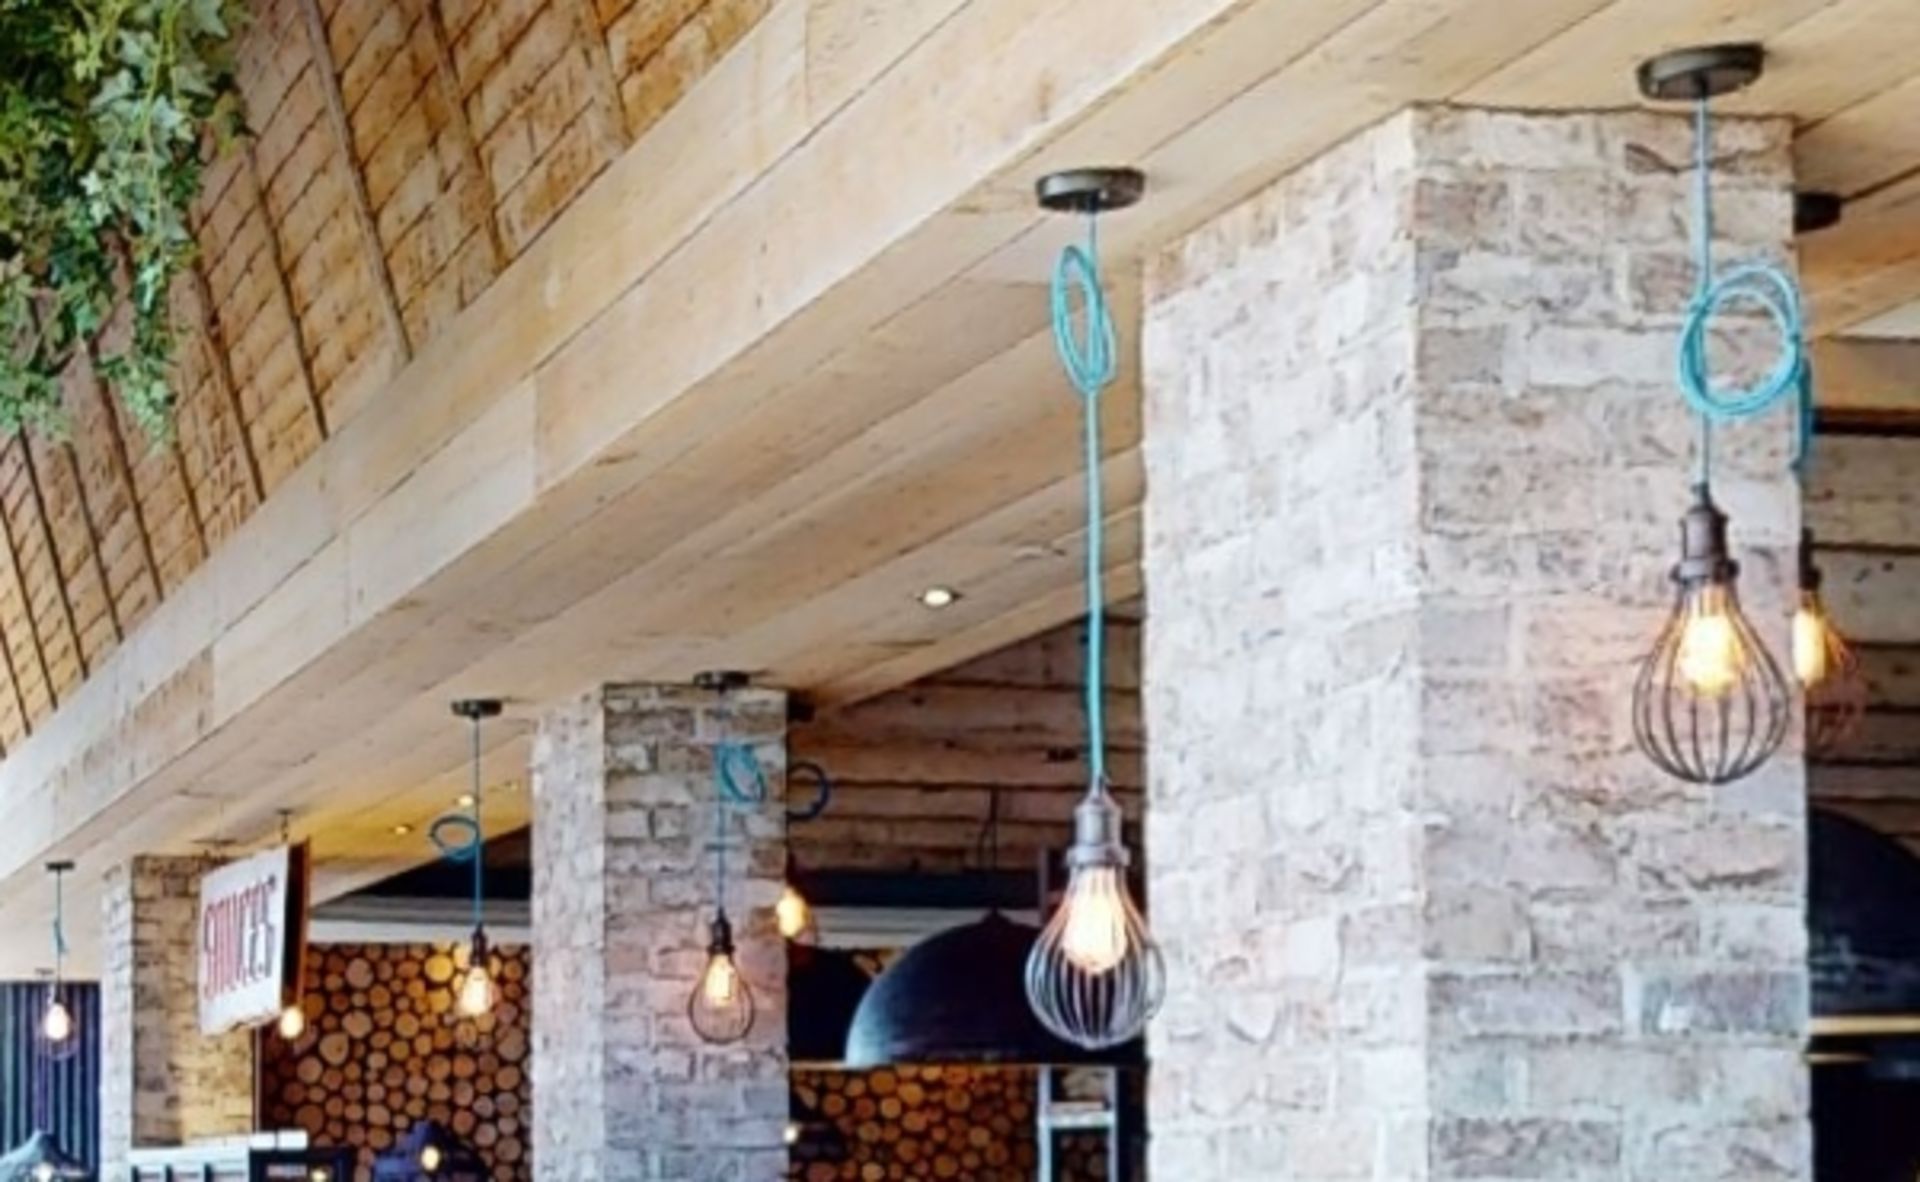 5 x Suspended Rope Lights With Blue Rope Cable, Antique Copper Cage Pendants and Ceiling Mounts - Image 5 of 5